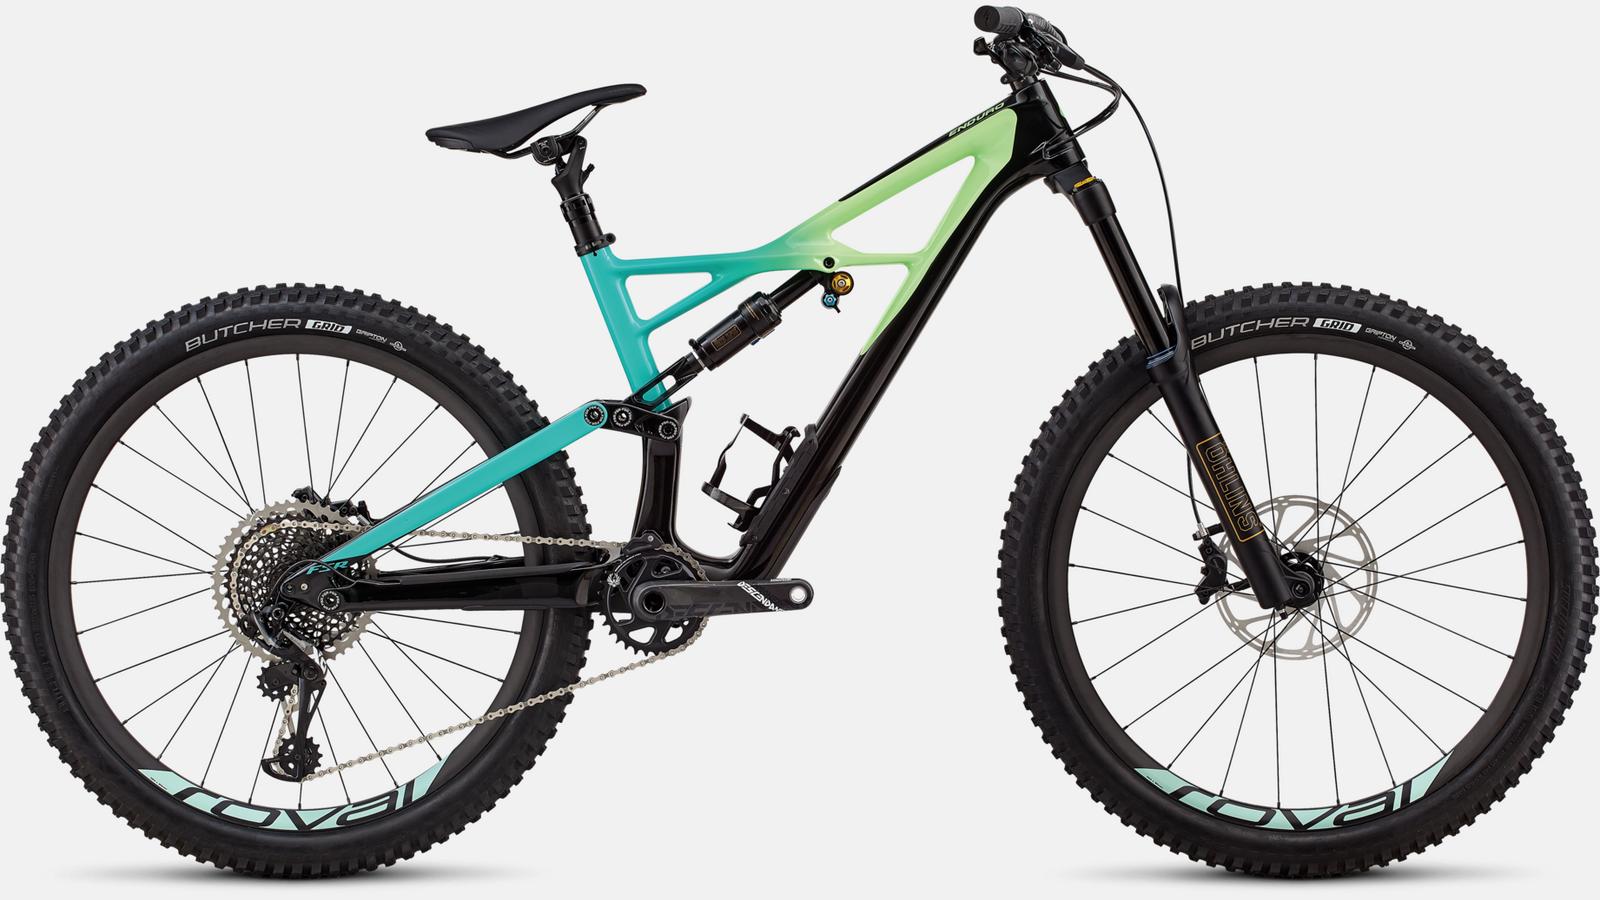 Paint for 2018 Specialized Enduro Pro 650b - Gloss Black